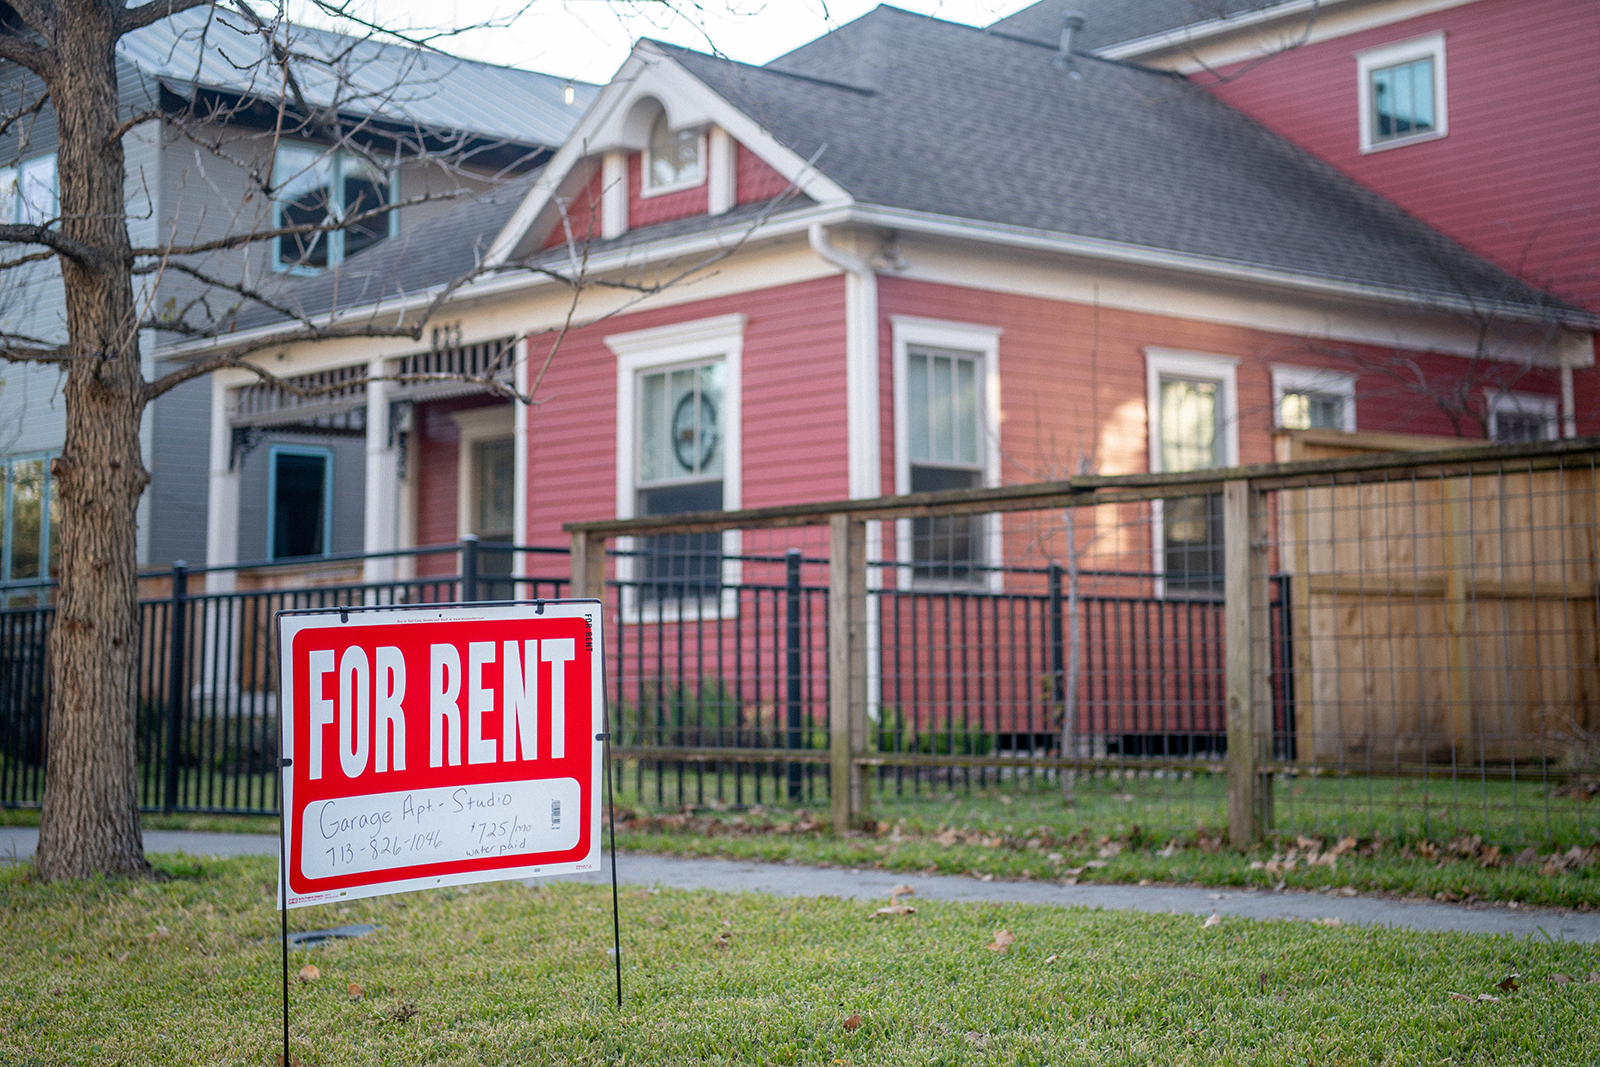 How to apply for Texas Rent Relief program opening this week